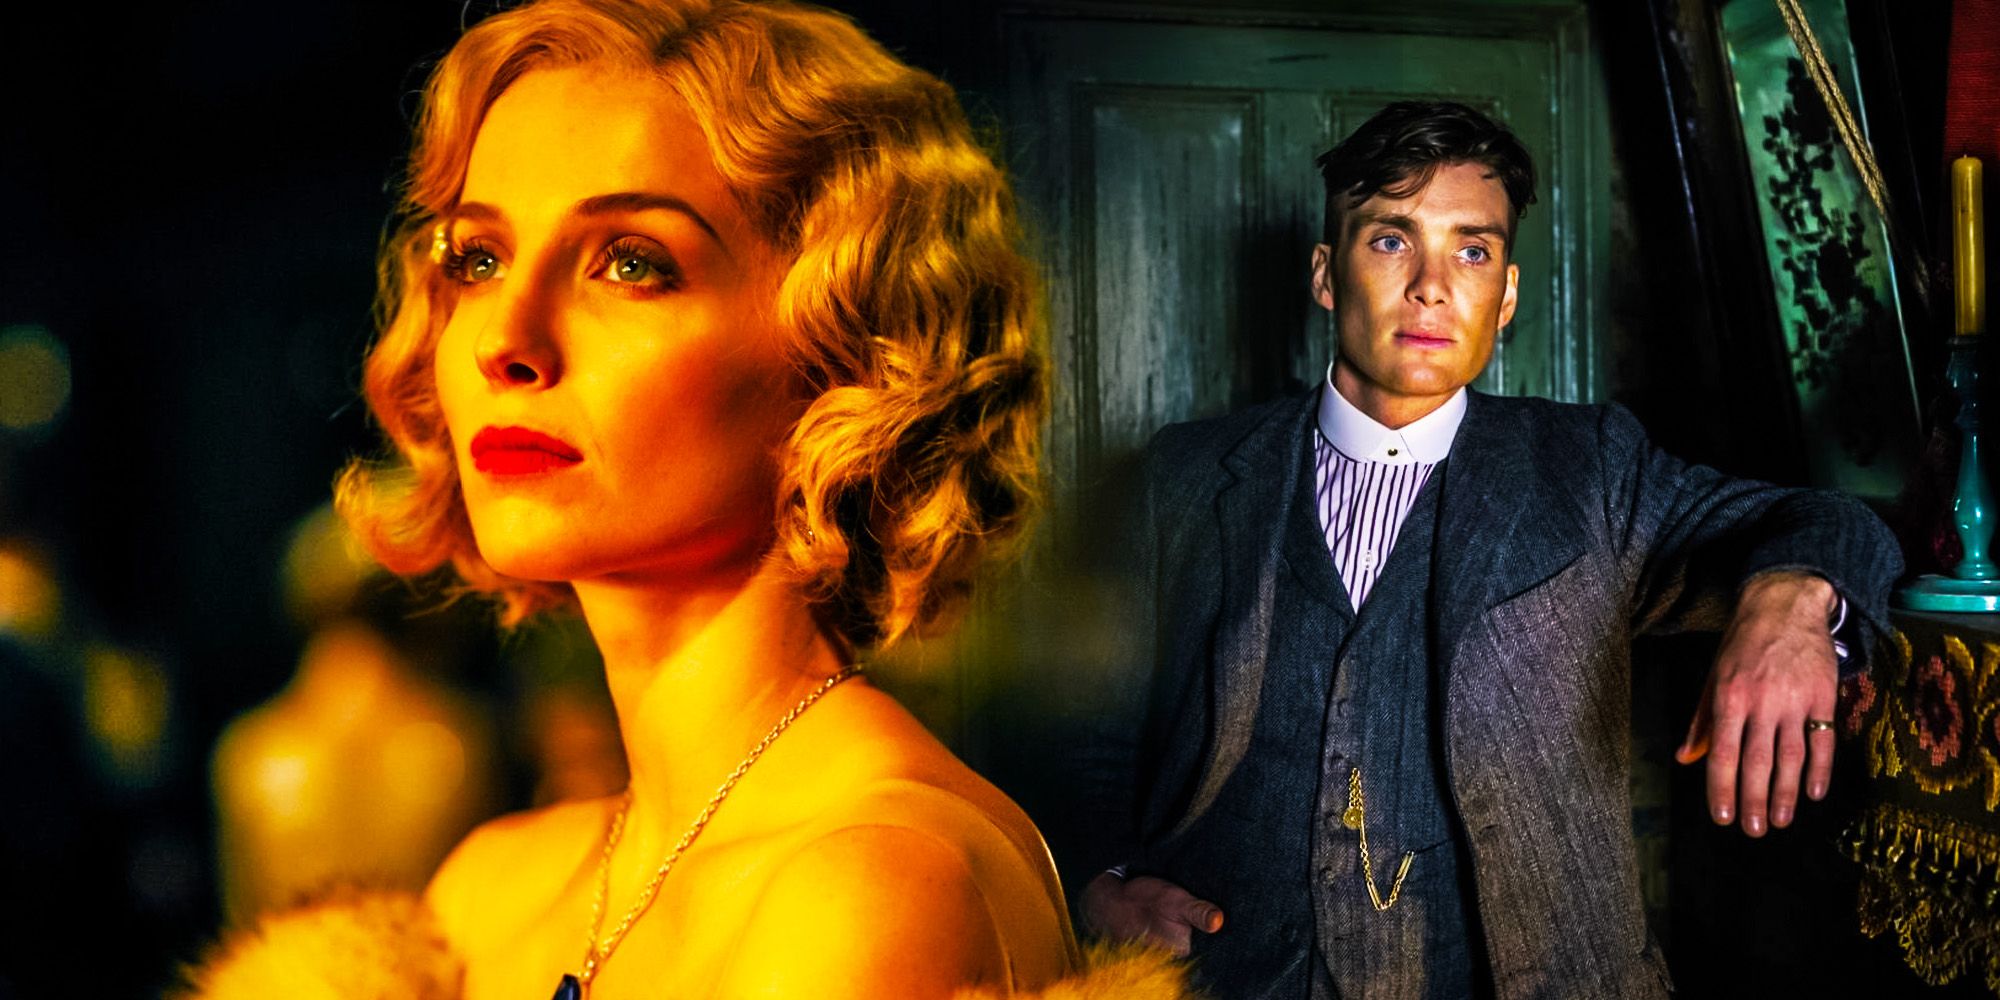 Peaky Blinders collage: Annabelle Wallis as Grace on the left and Cillian Murphy as Tommy on the right